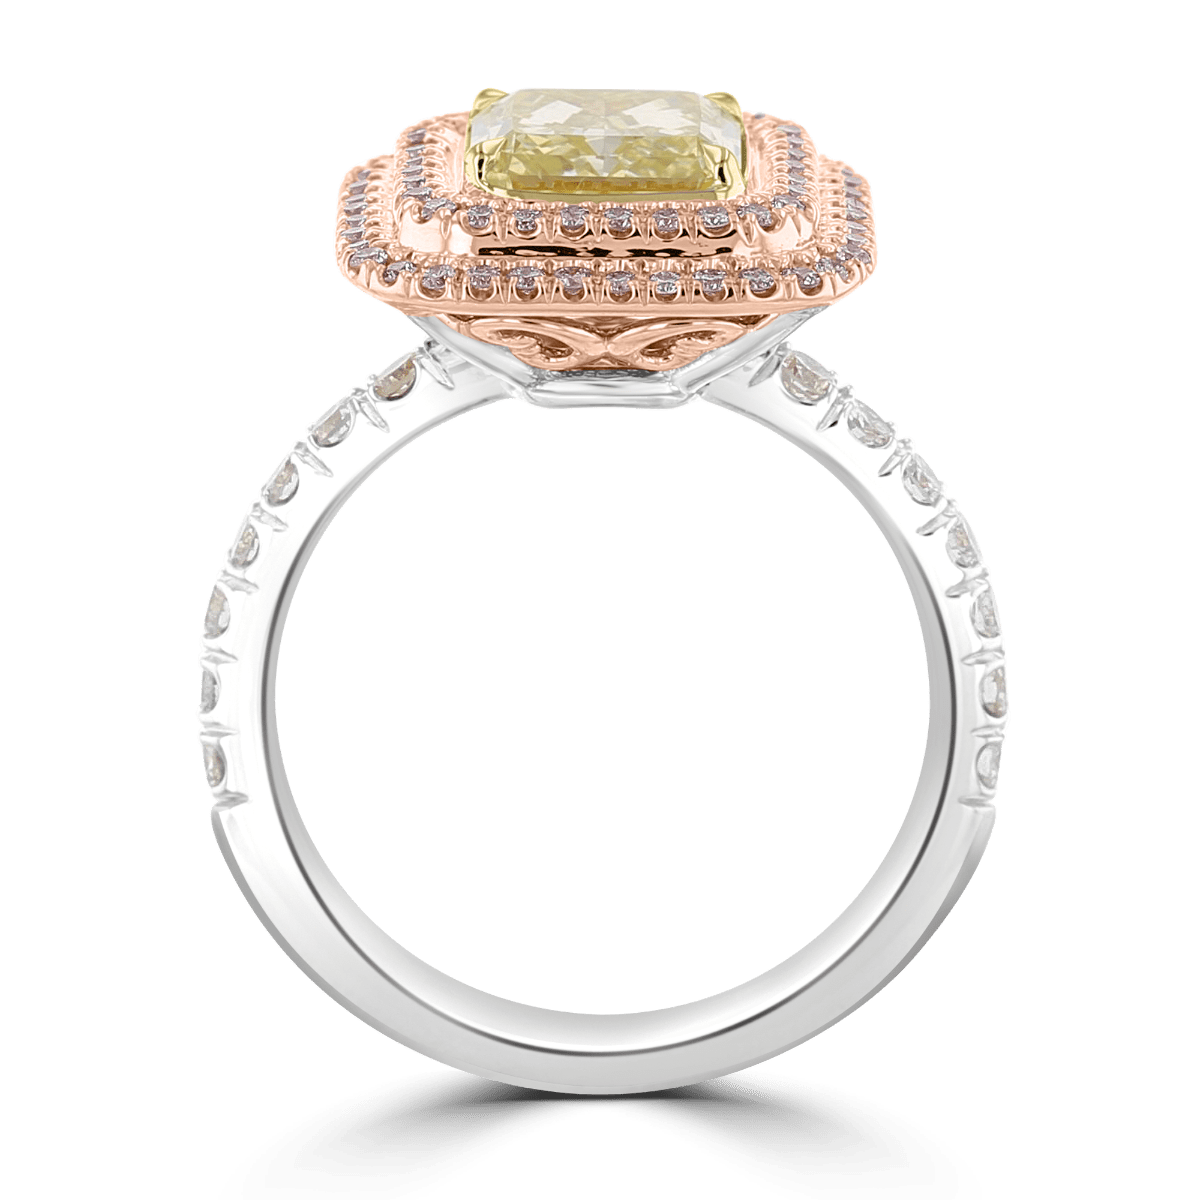 18KT TWO-TONE GOLD 2.75 CTW GREENISH YELLOW & PINK DIAMOND DOUBLE HALO RING 4,4.5,5,5.5,6,6.5,7,7.5,8,8.5,9